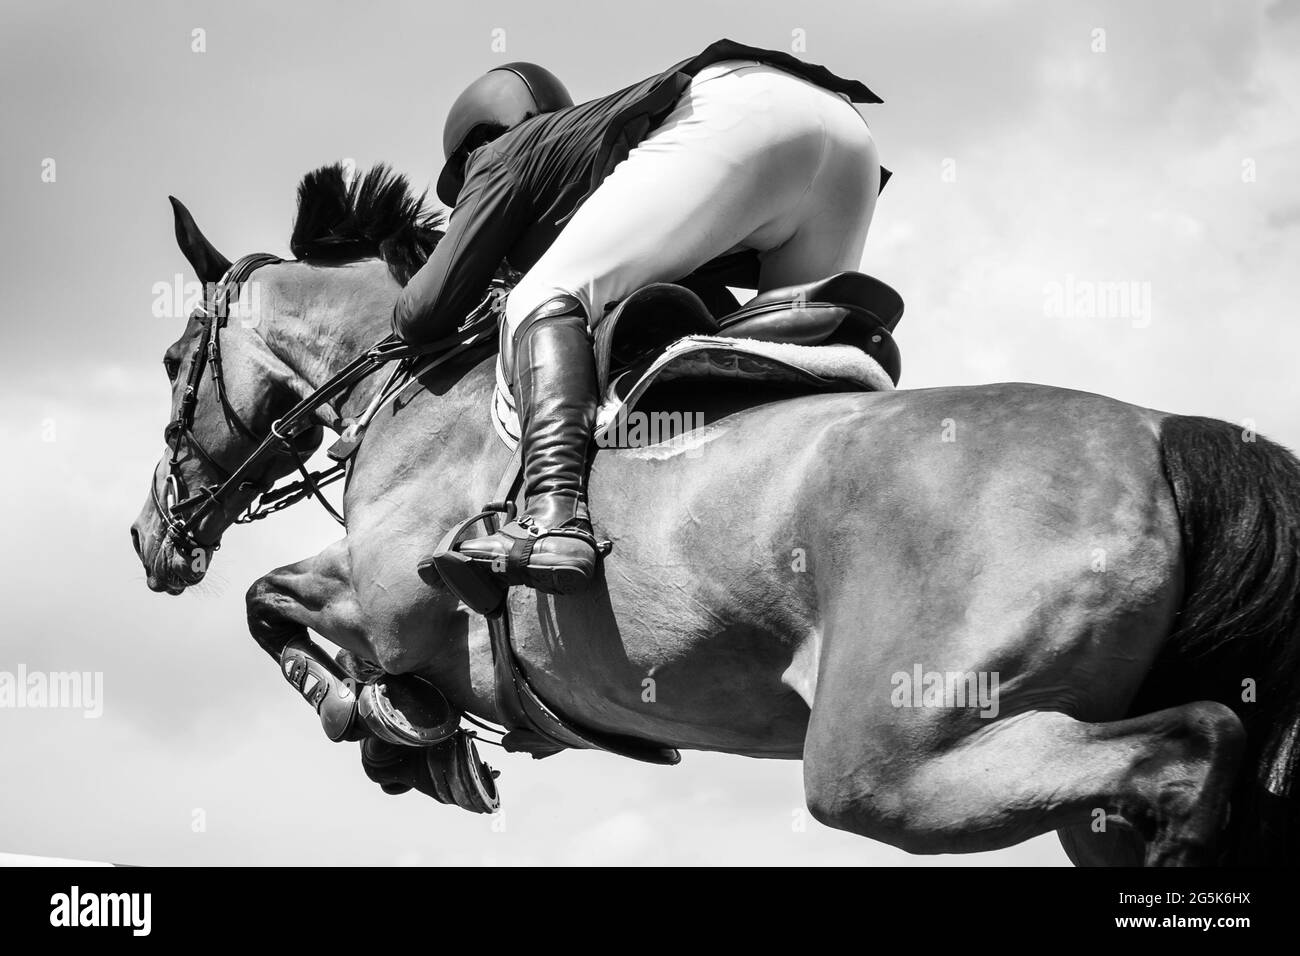 Black and white Equestrian Sports photo-themed: Horse jumping, Show Jumping, Horse riding. Stock Photo